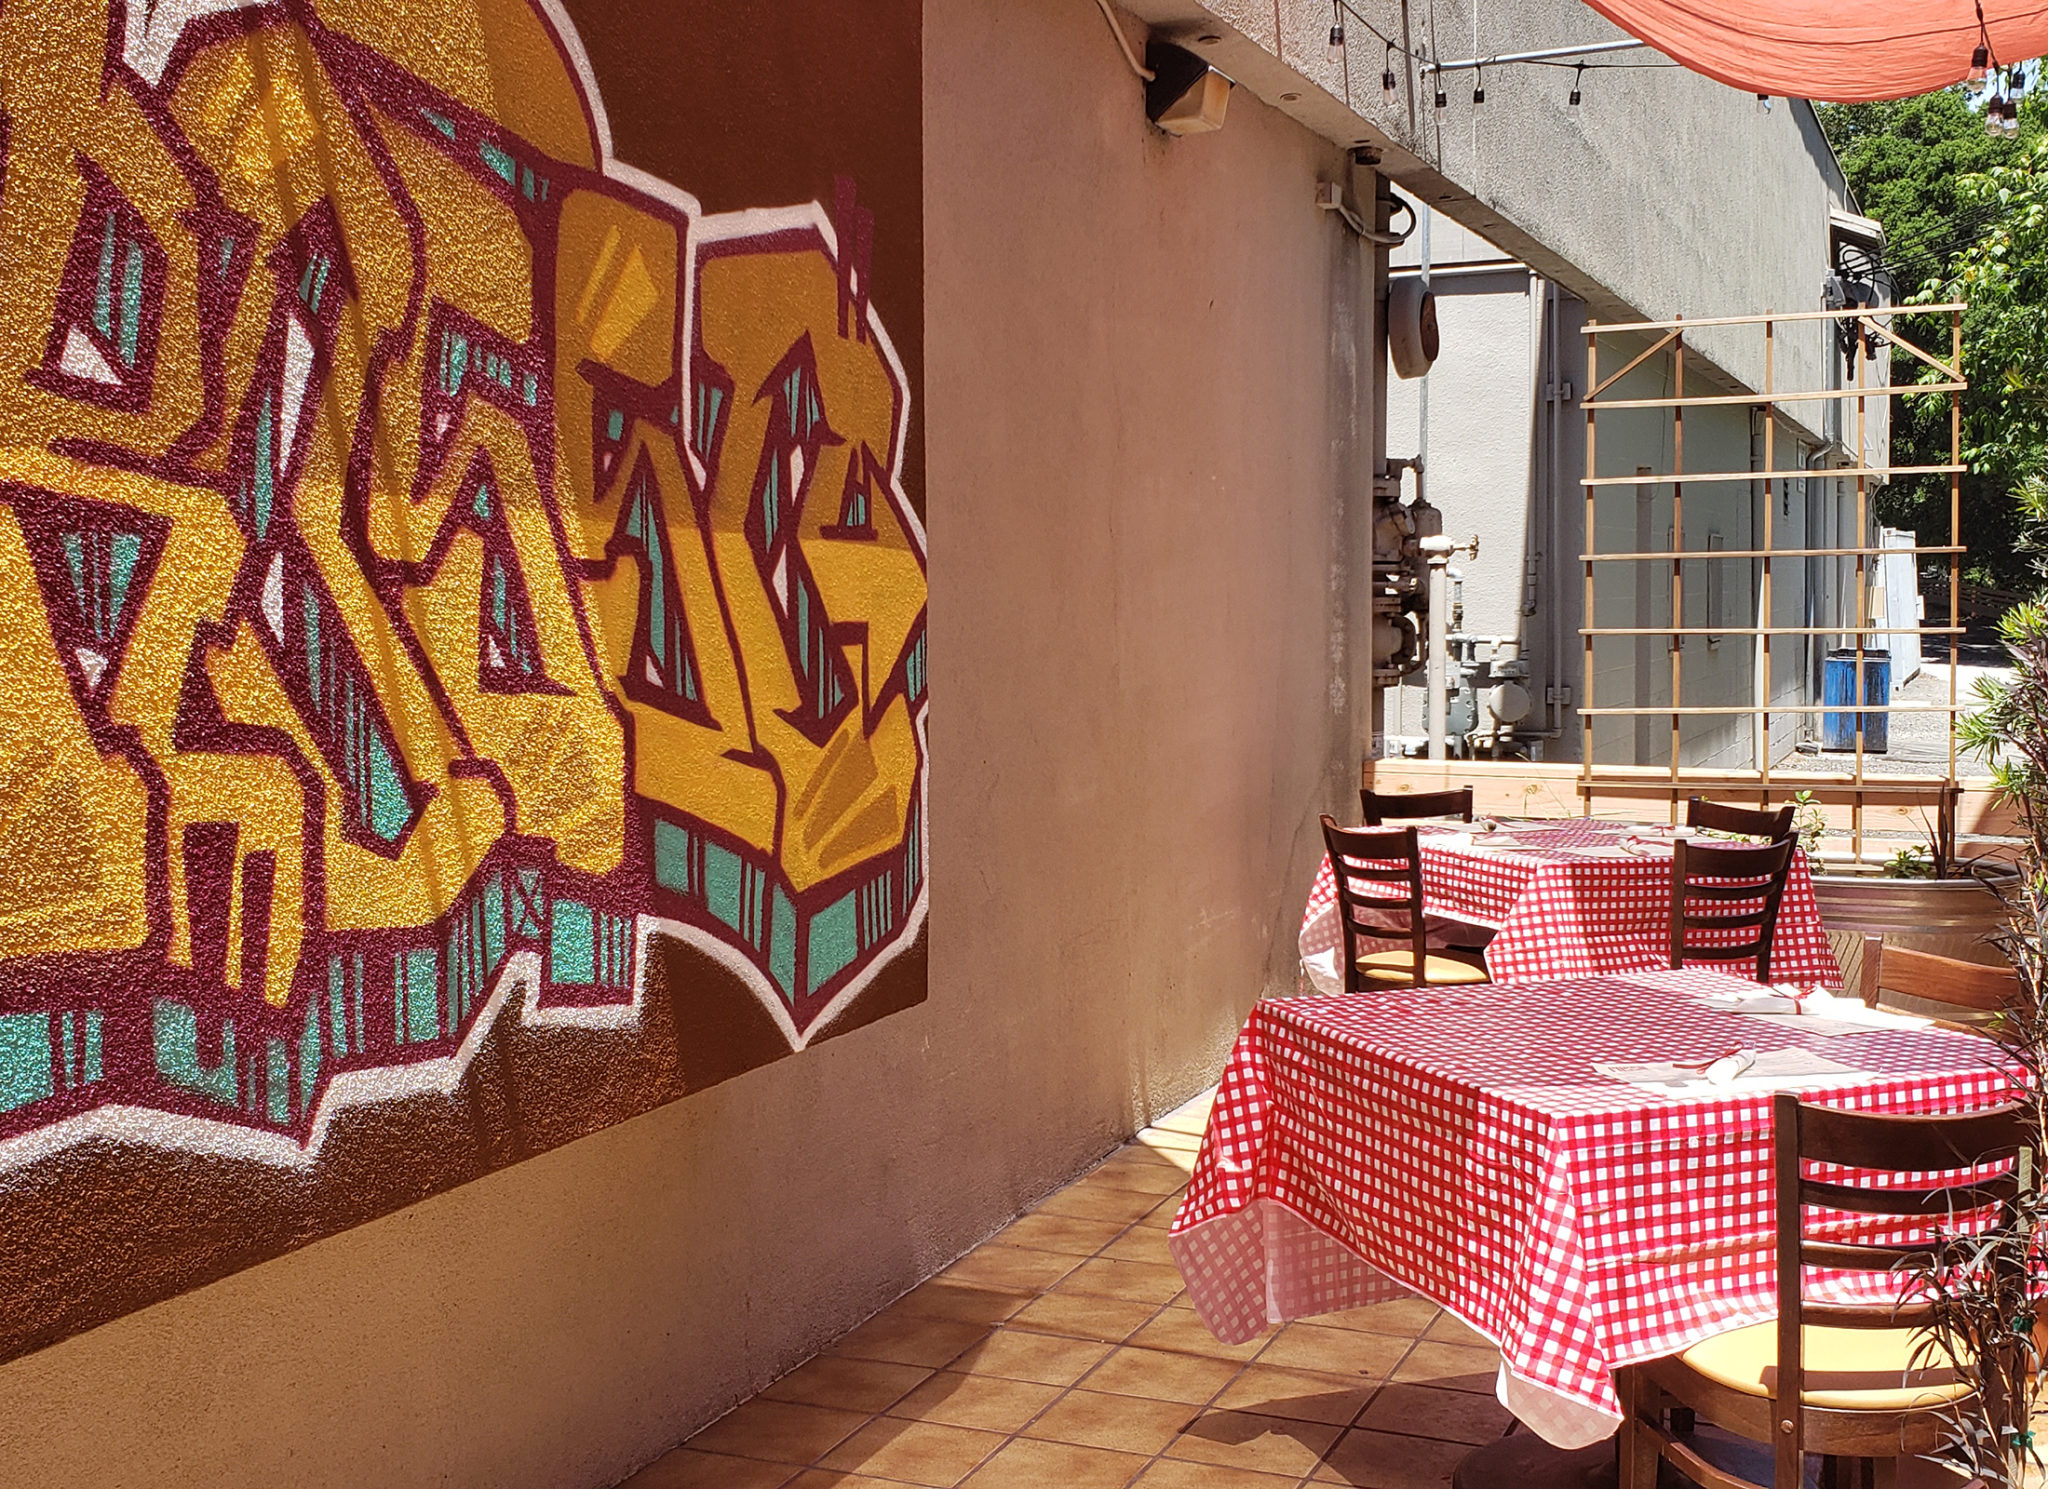 The new back porch at Rosso Pizzeria in Santa Rosa. The restaurant has reopened for patio dining. Heather Irwin/PD